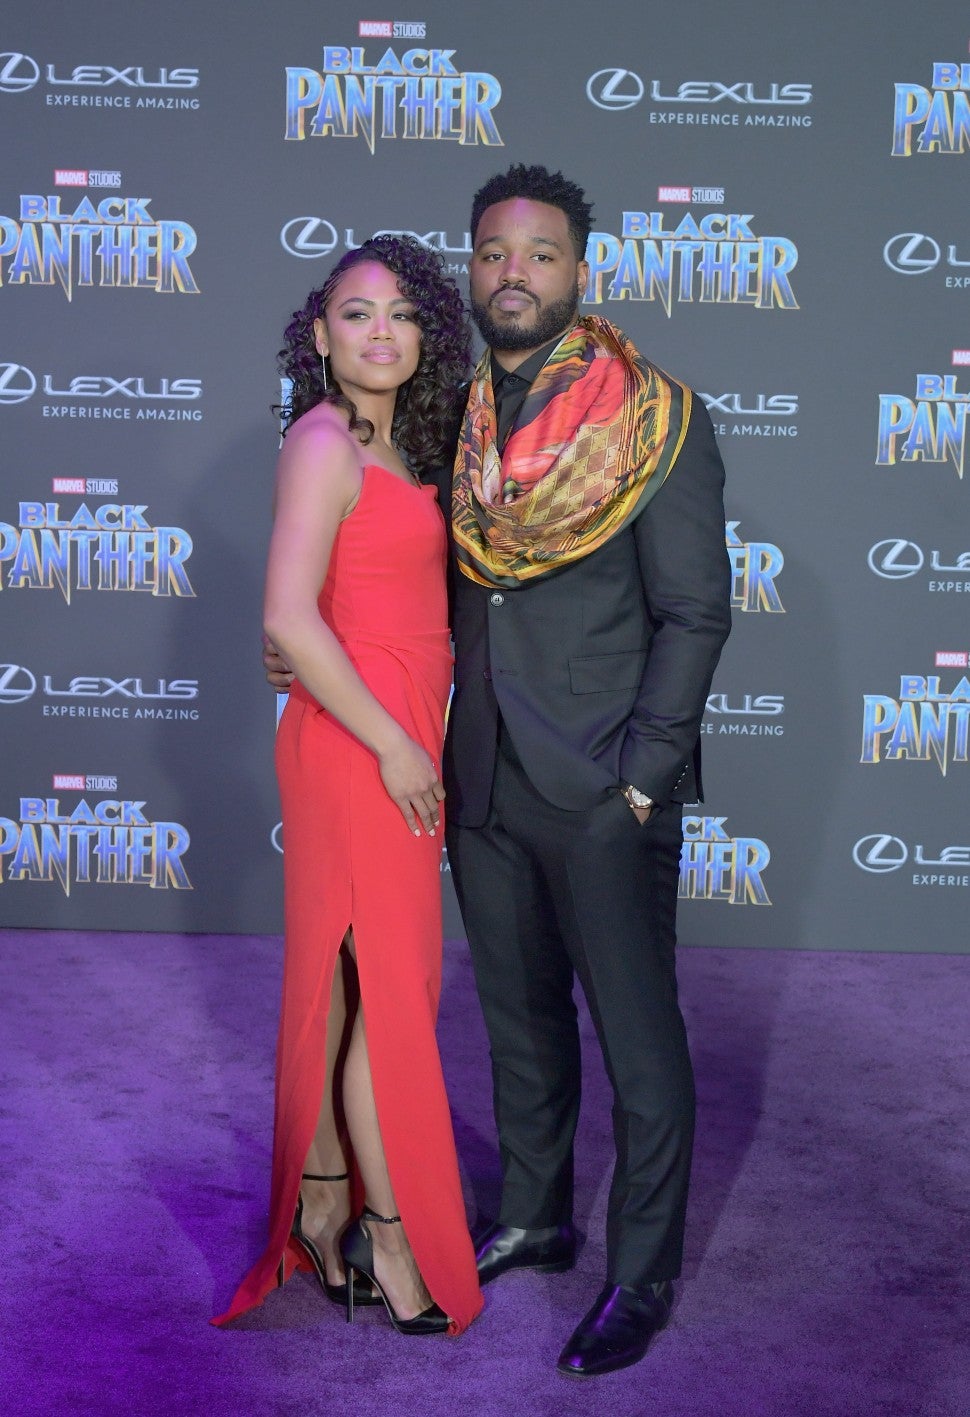 Ryan Coogler and wife at Black Panther premiere